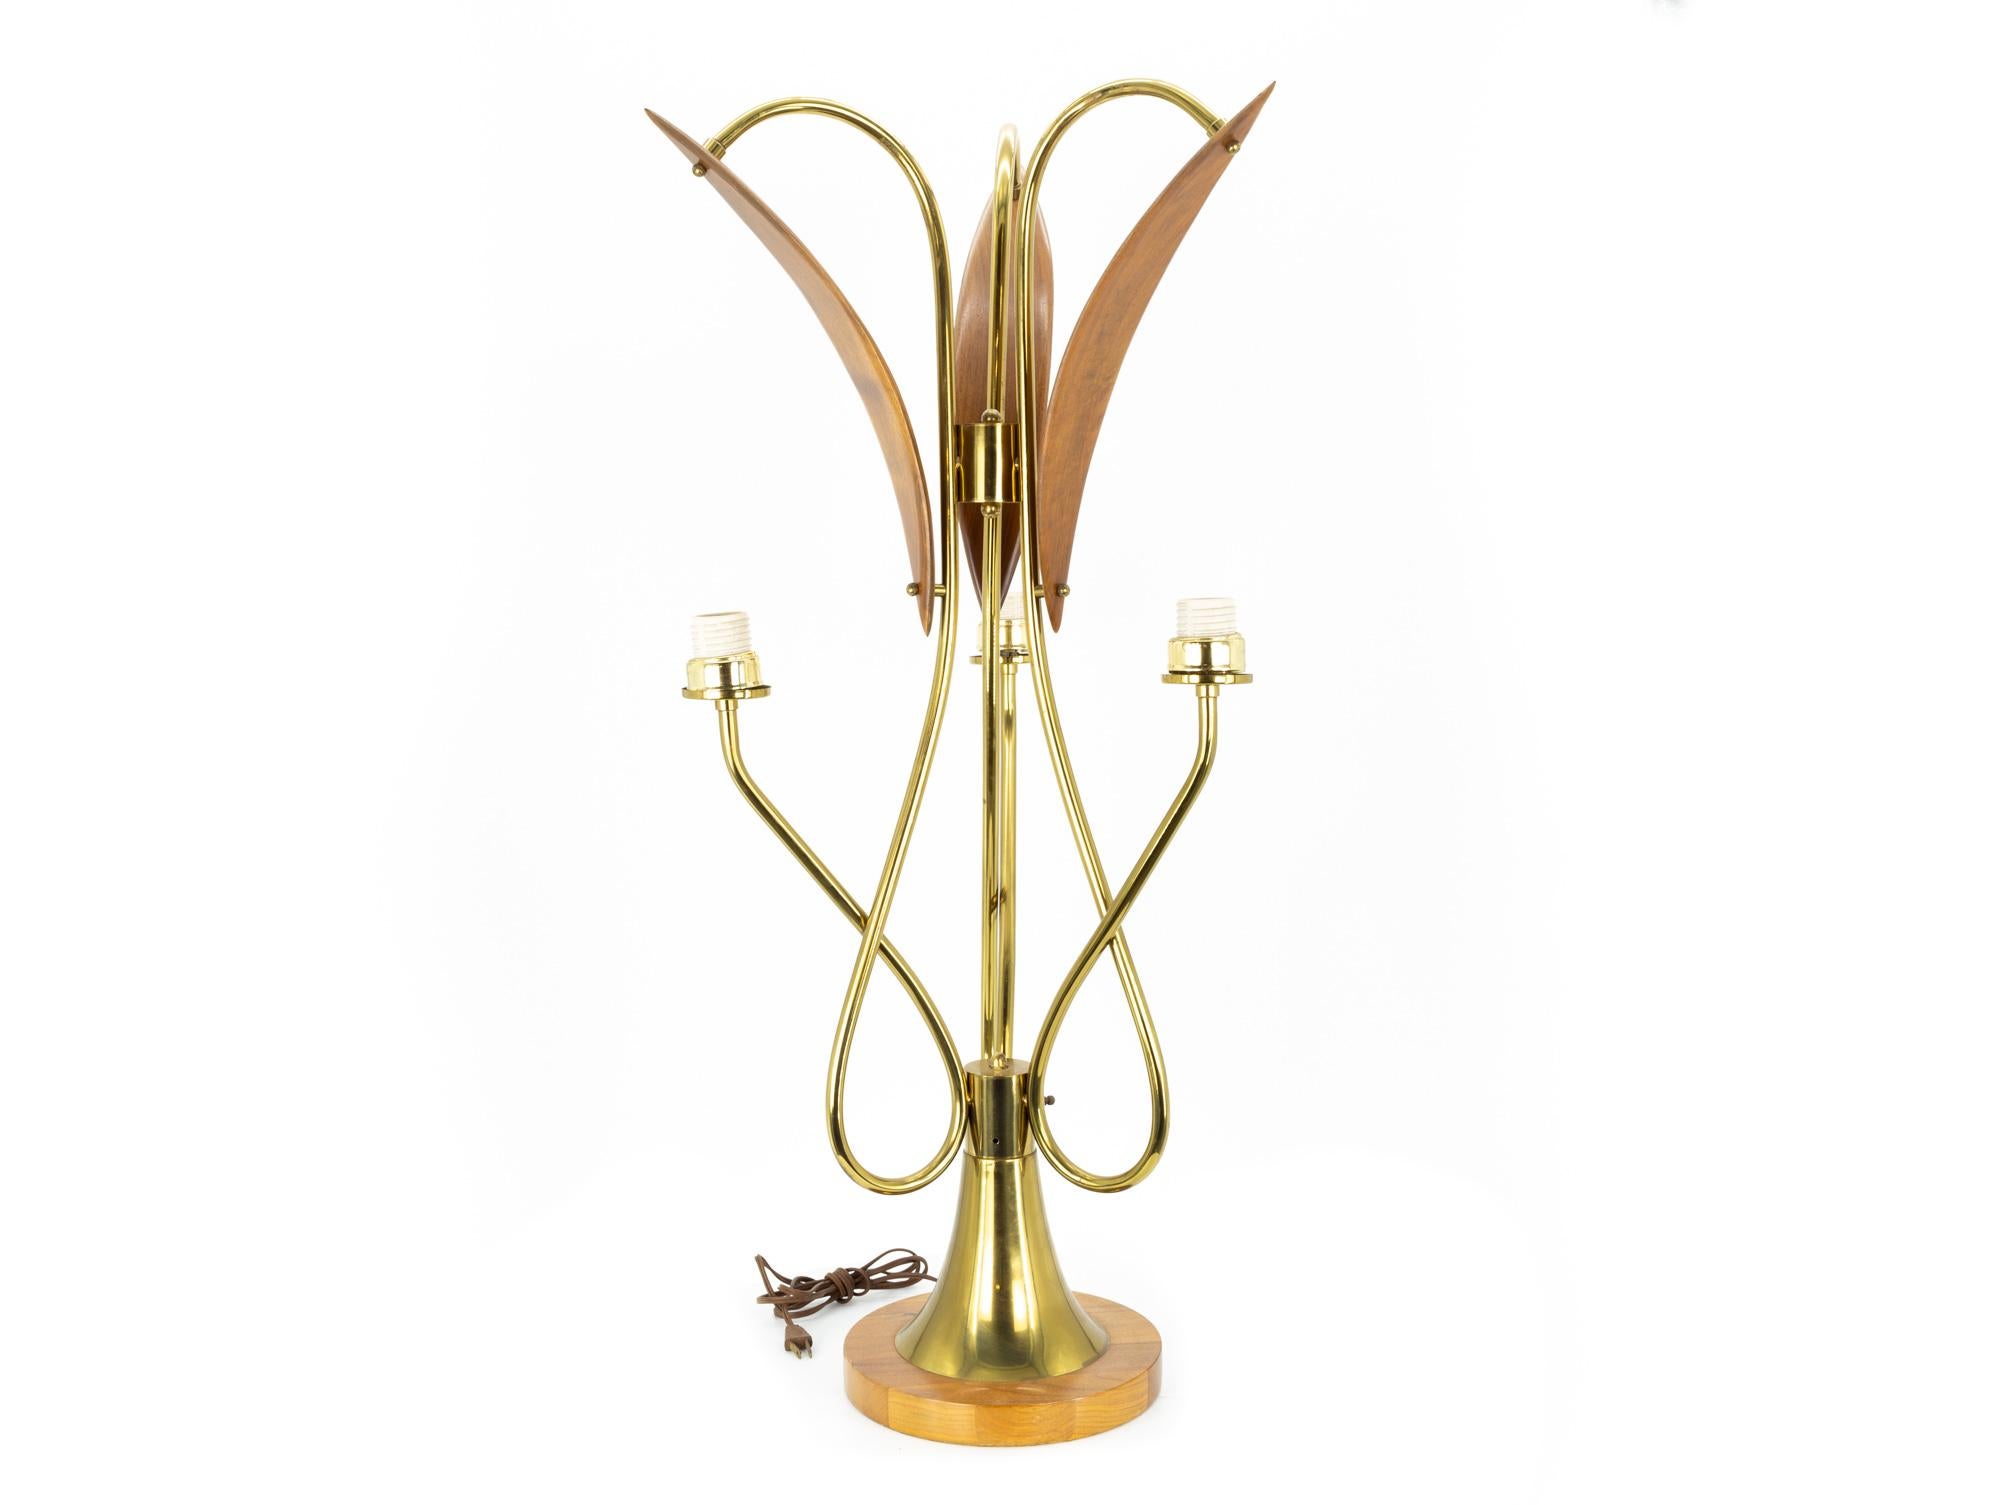 Nomina Organica Mid Century Brass Walnut Lamps - Pair

These lamps measure: 15.5 wide x 15.5 deep x 35.5 inches high

These lamps are in Excellent Vintage Condition

We take our photos in a controlled lighting studio to show as much detail as